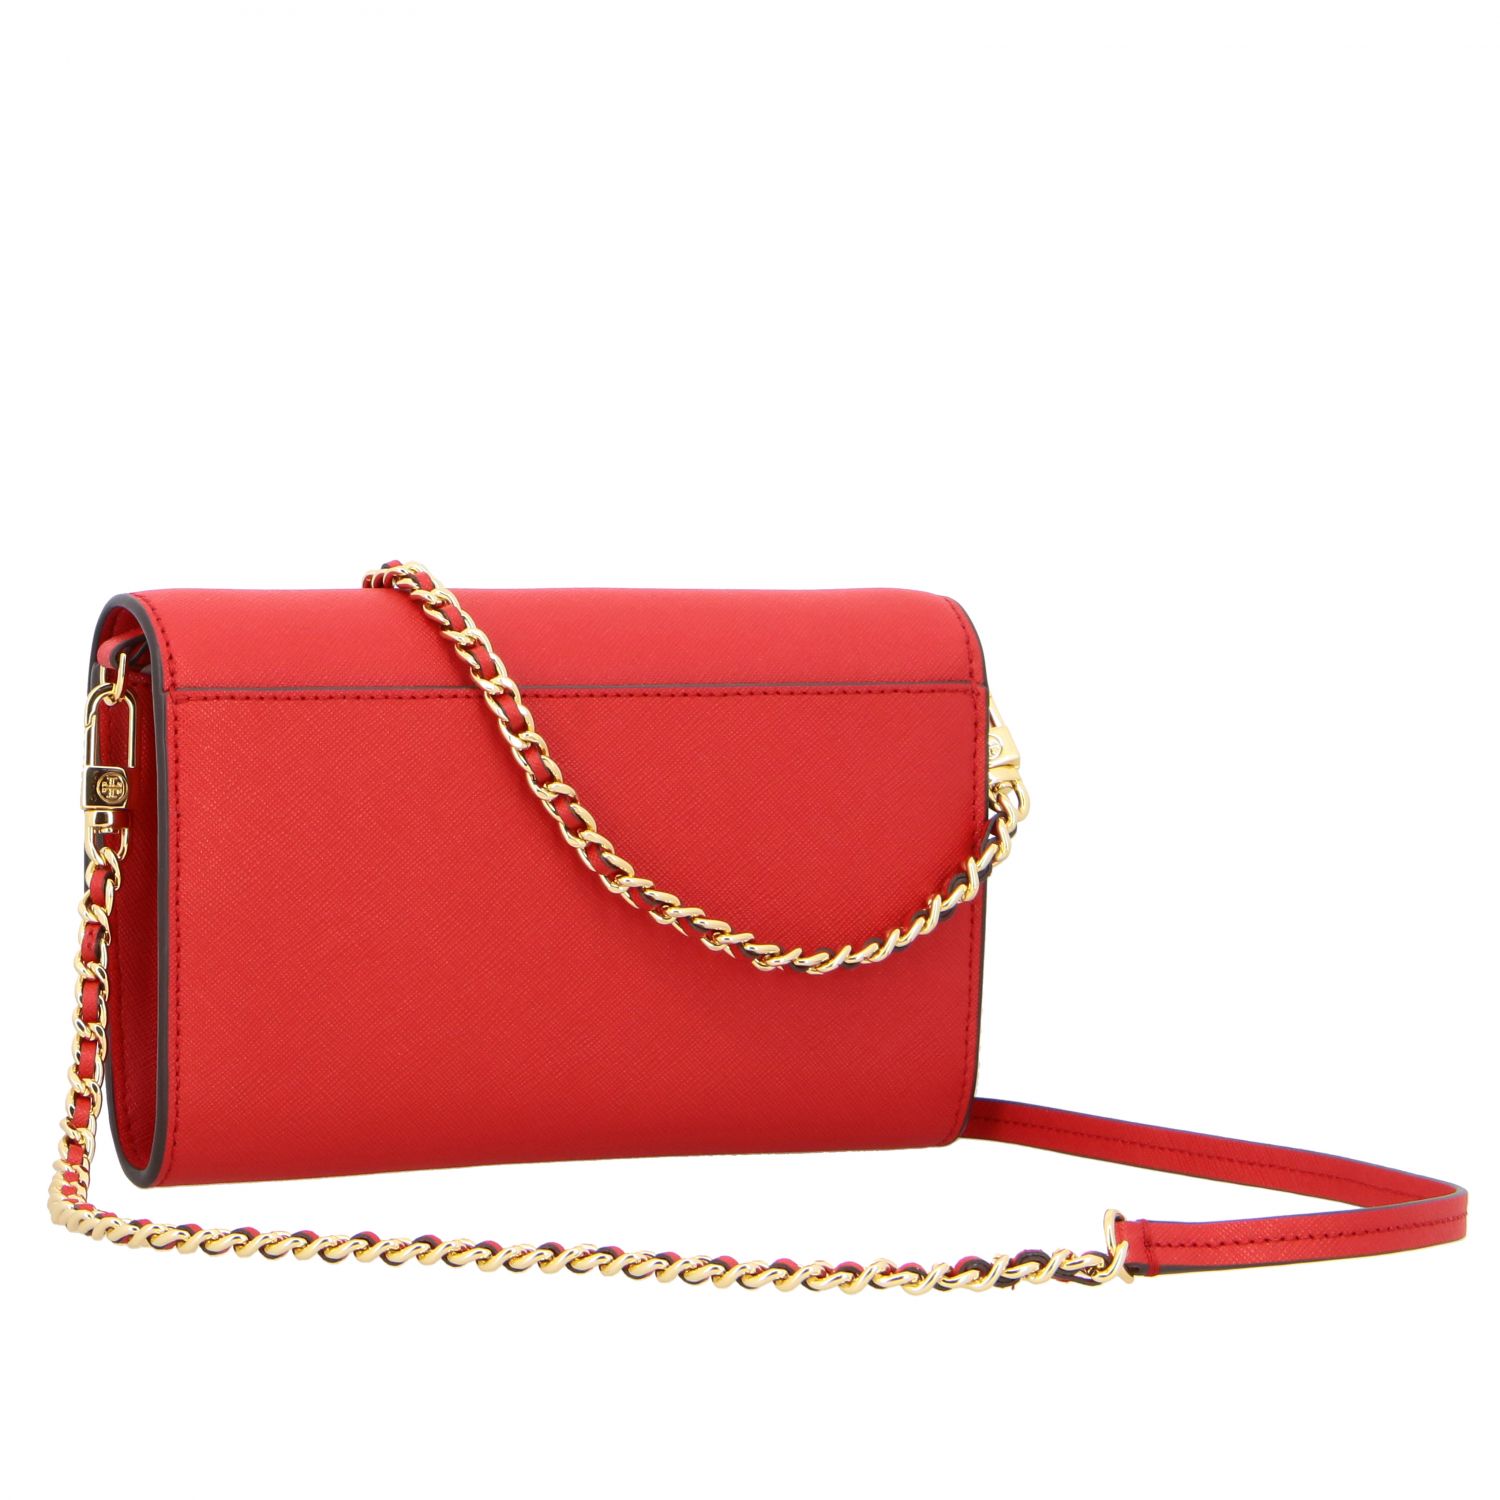 Tory Burch Outlet: Robinson chain wallet shoulder bag - Red | Tory Burch  mini bag 54277 online on 